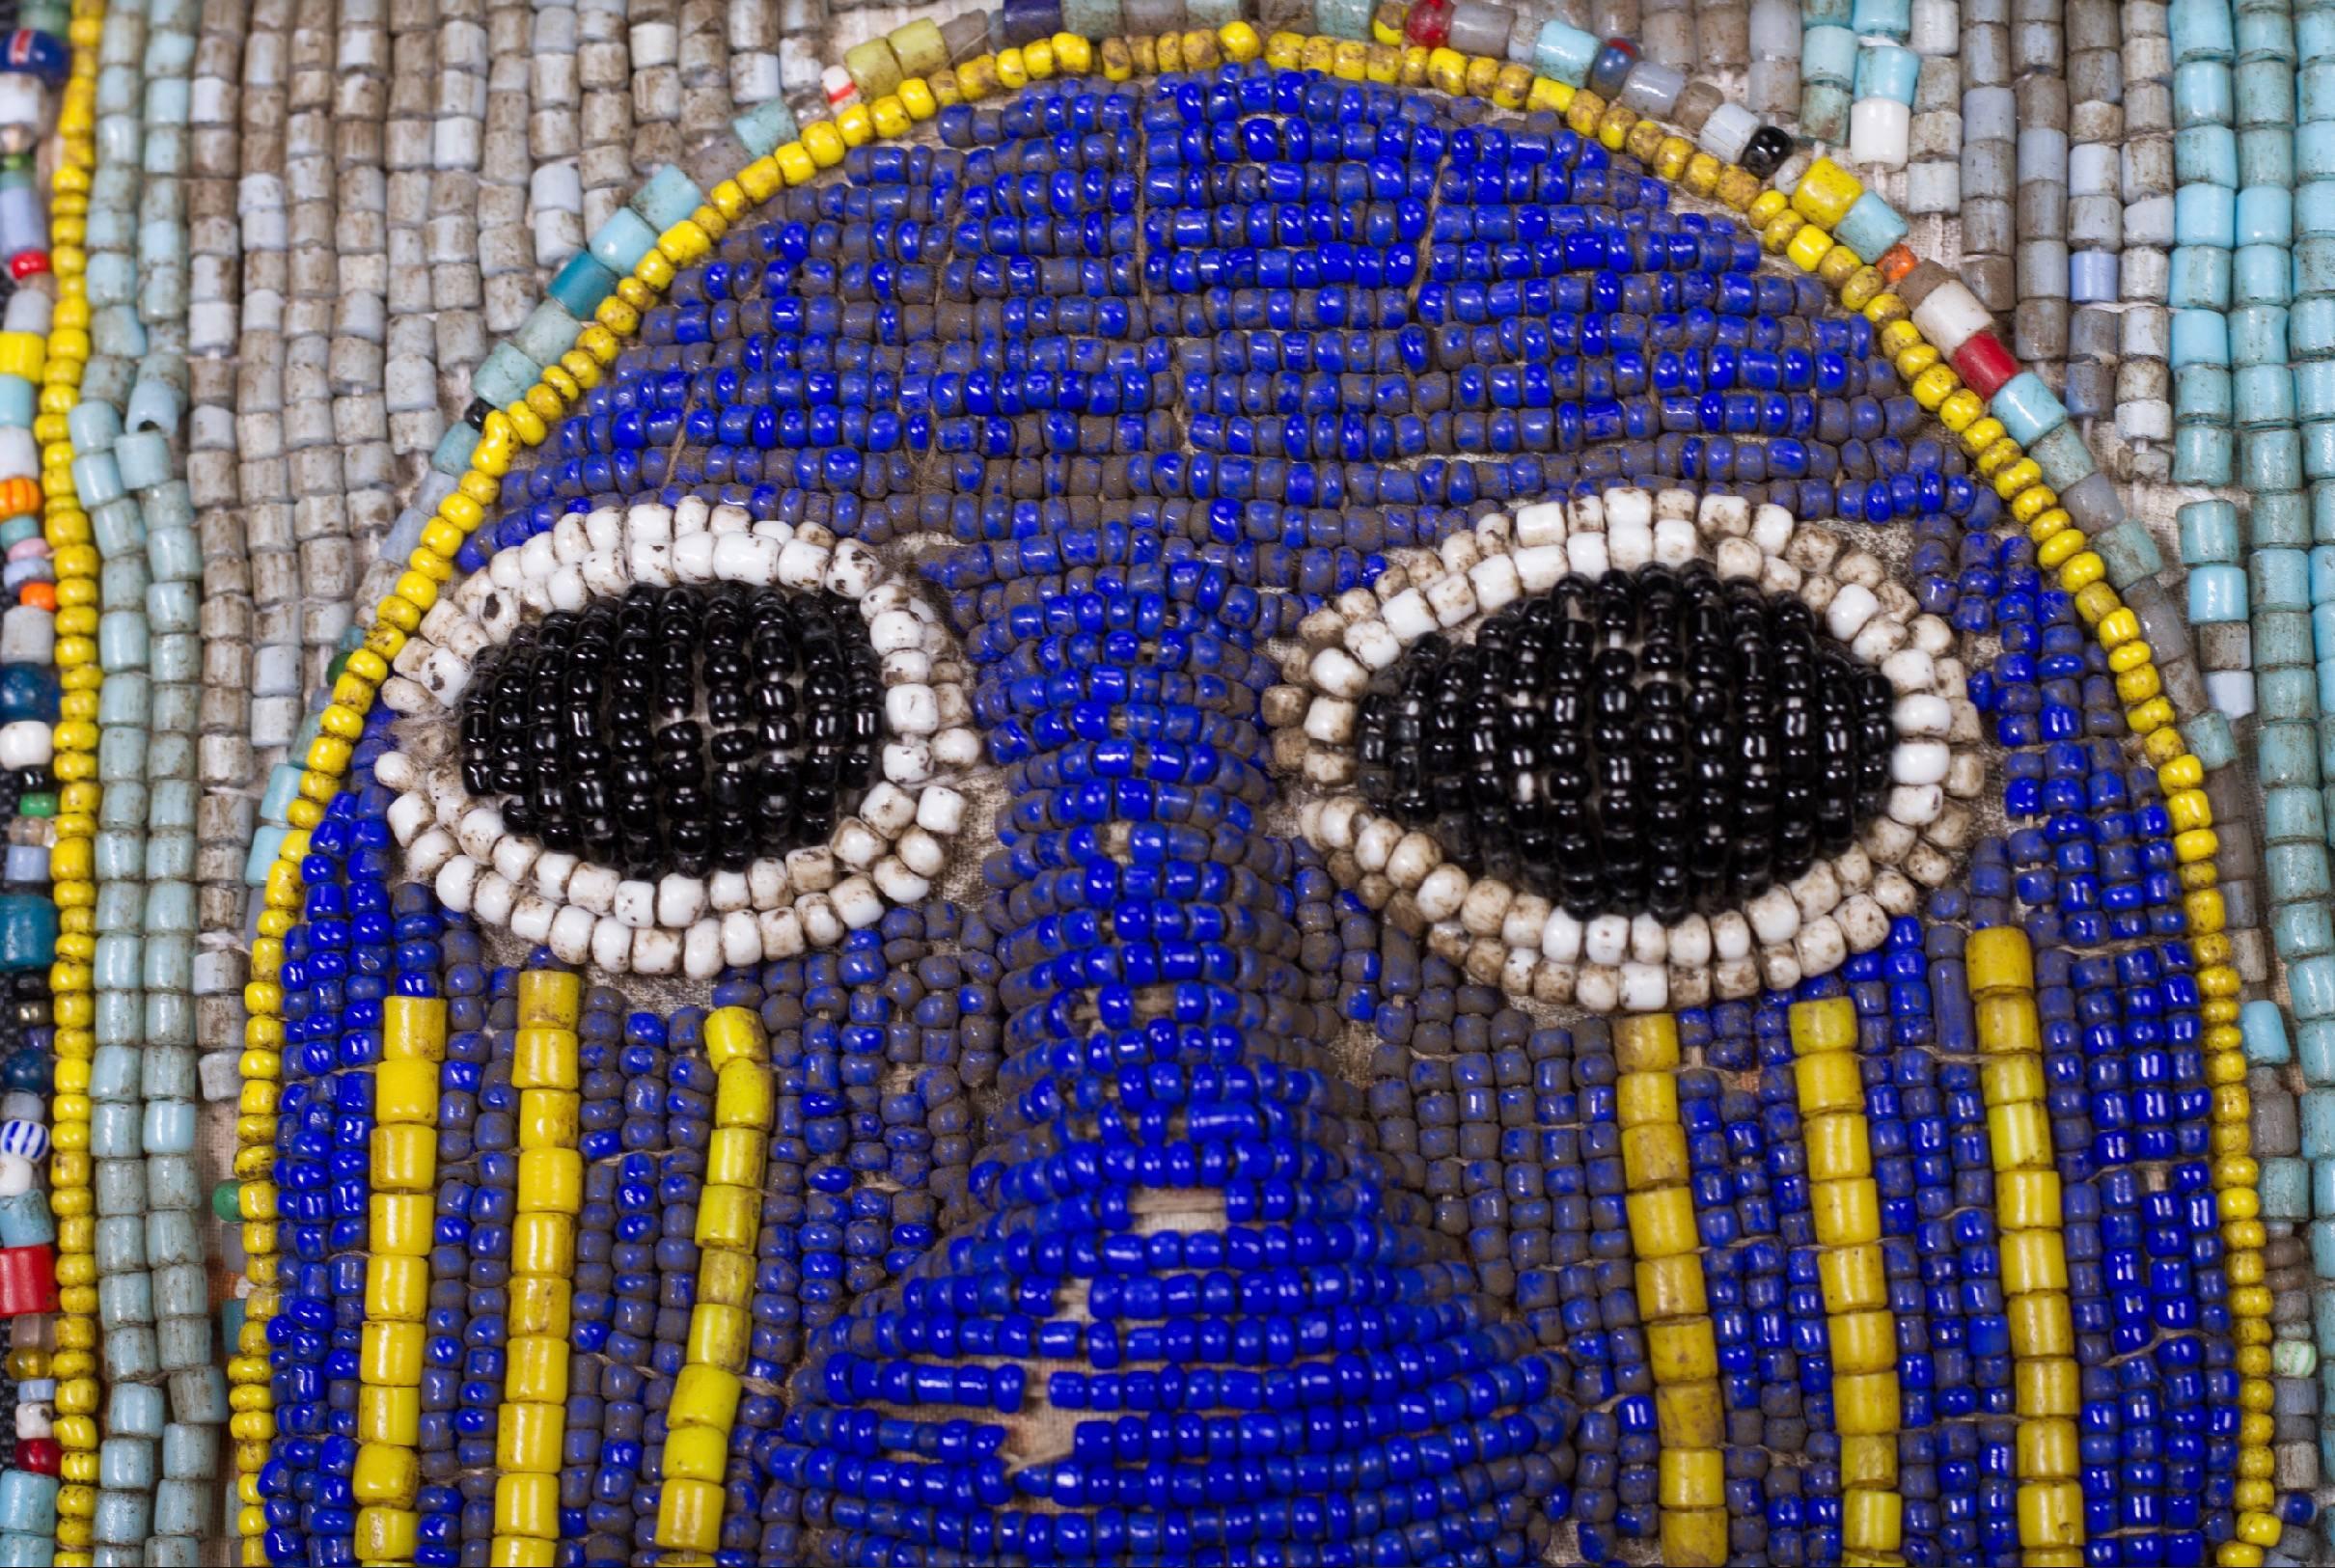 An amazing antique Japanese hand-dyed indigo net was paired with a West African mask. The mix of materials and cultures highlights both perfectly. 

Details

Hand beaded West African mask
Antique Japanese indigo net
Includes down insert
Made